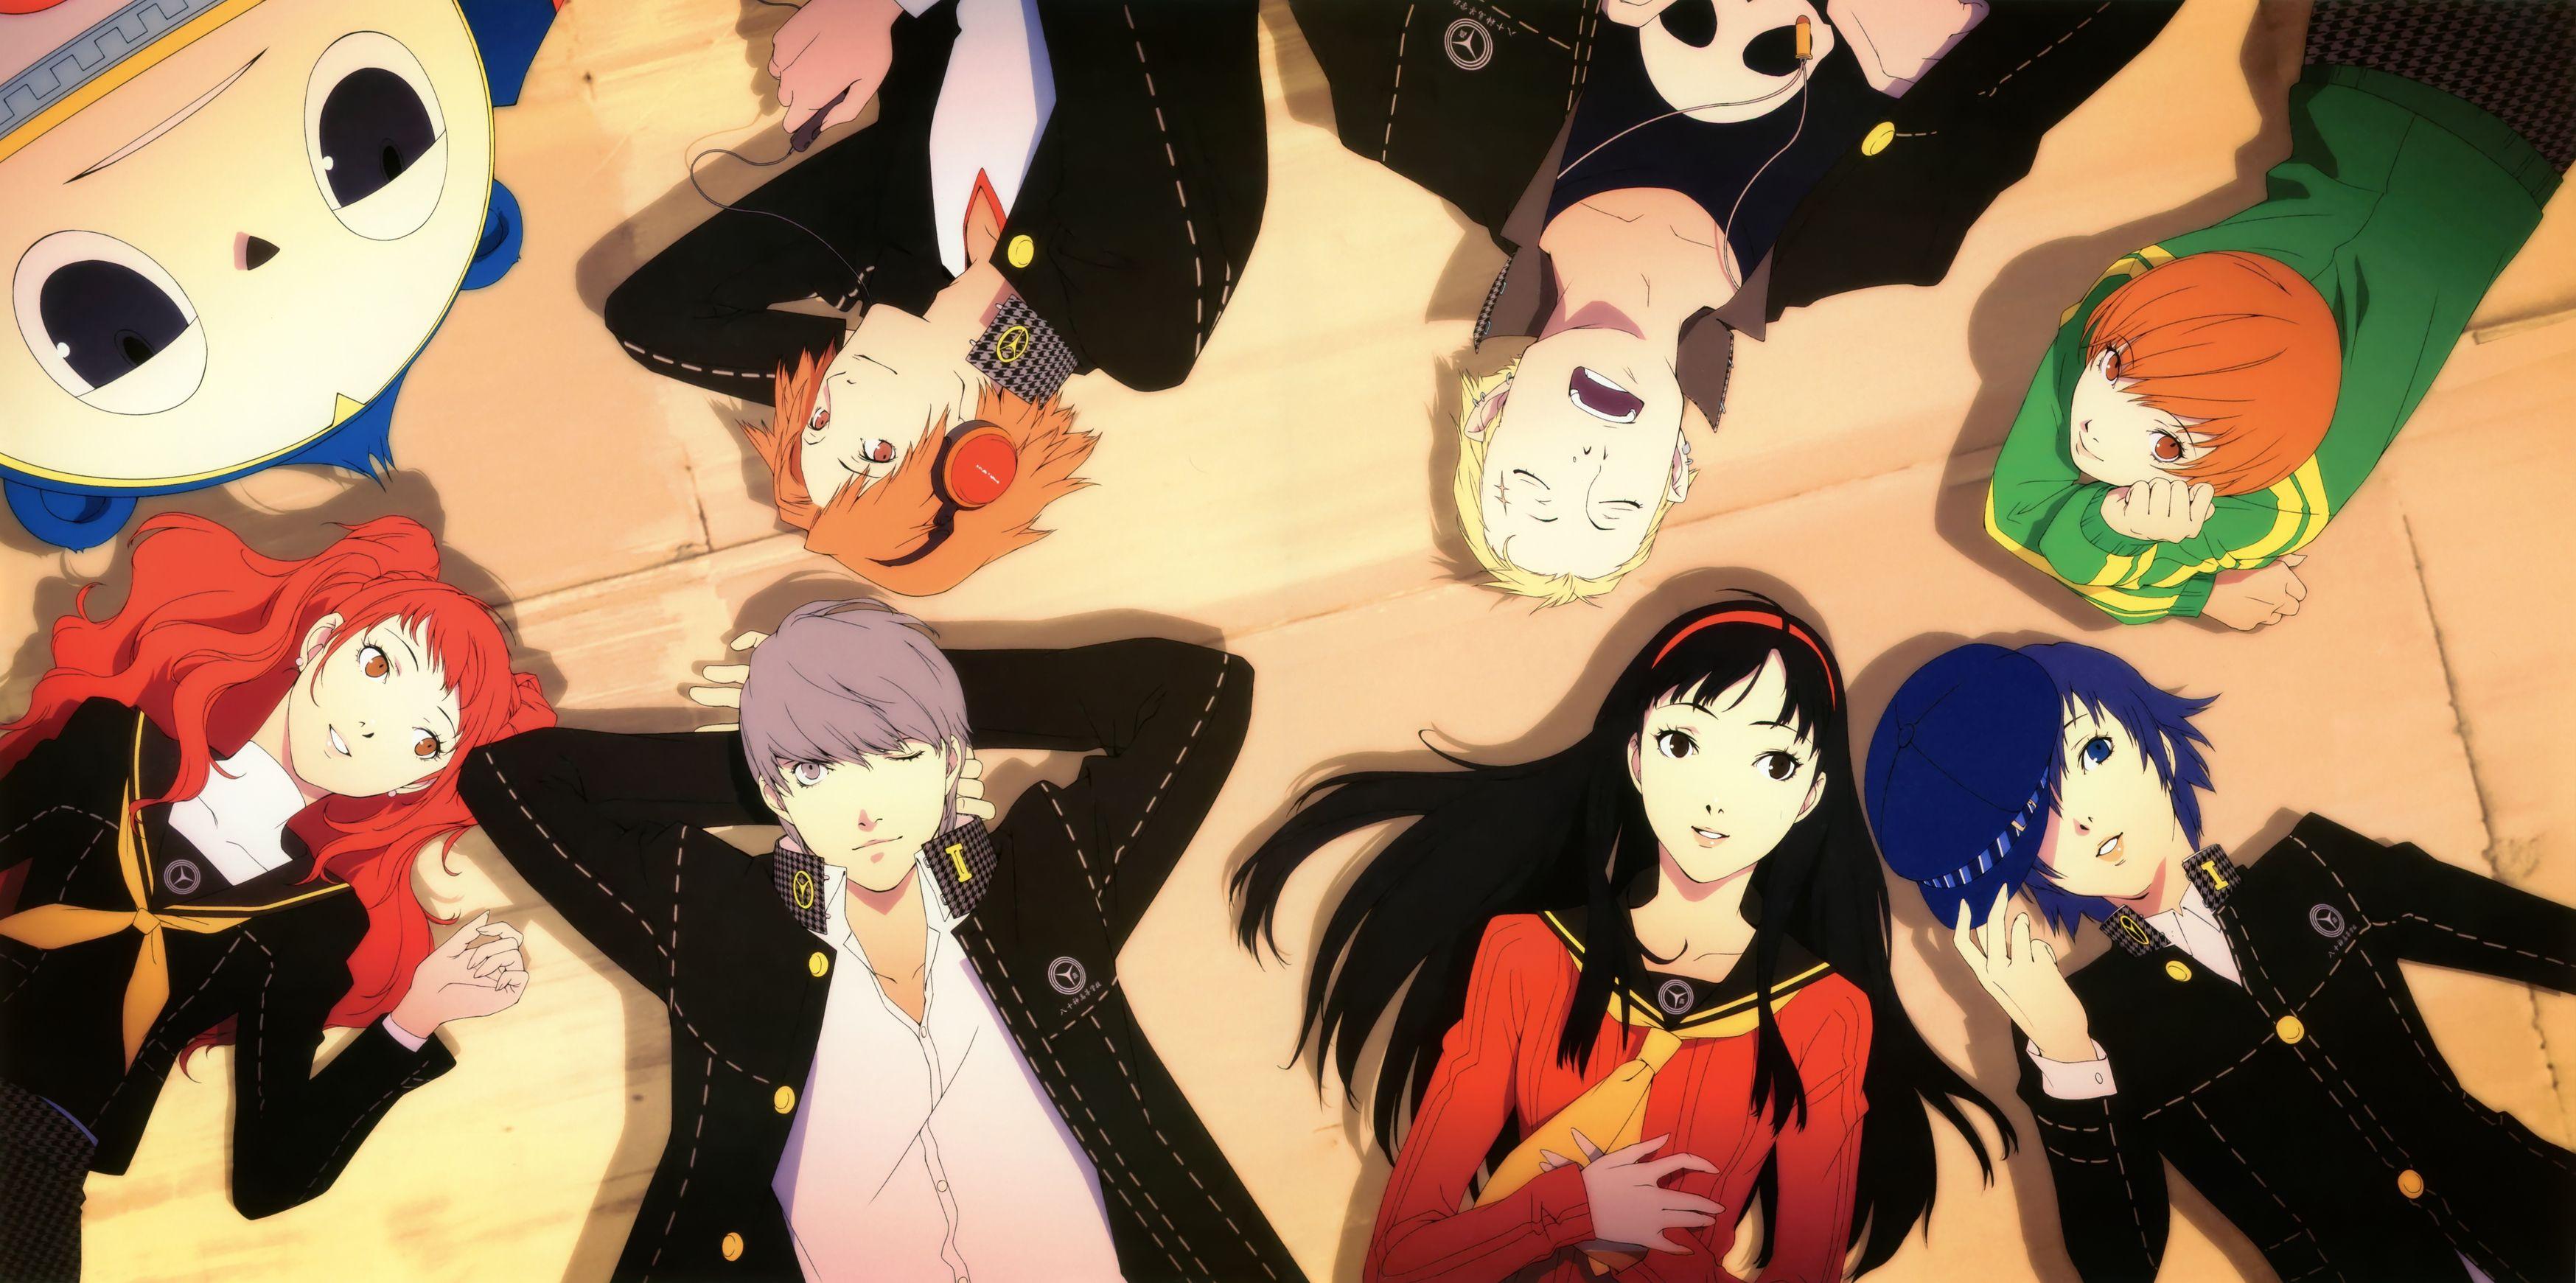 Persona 4 Is The Most Immersive Game I've Ever Played